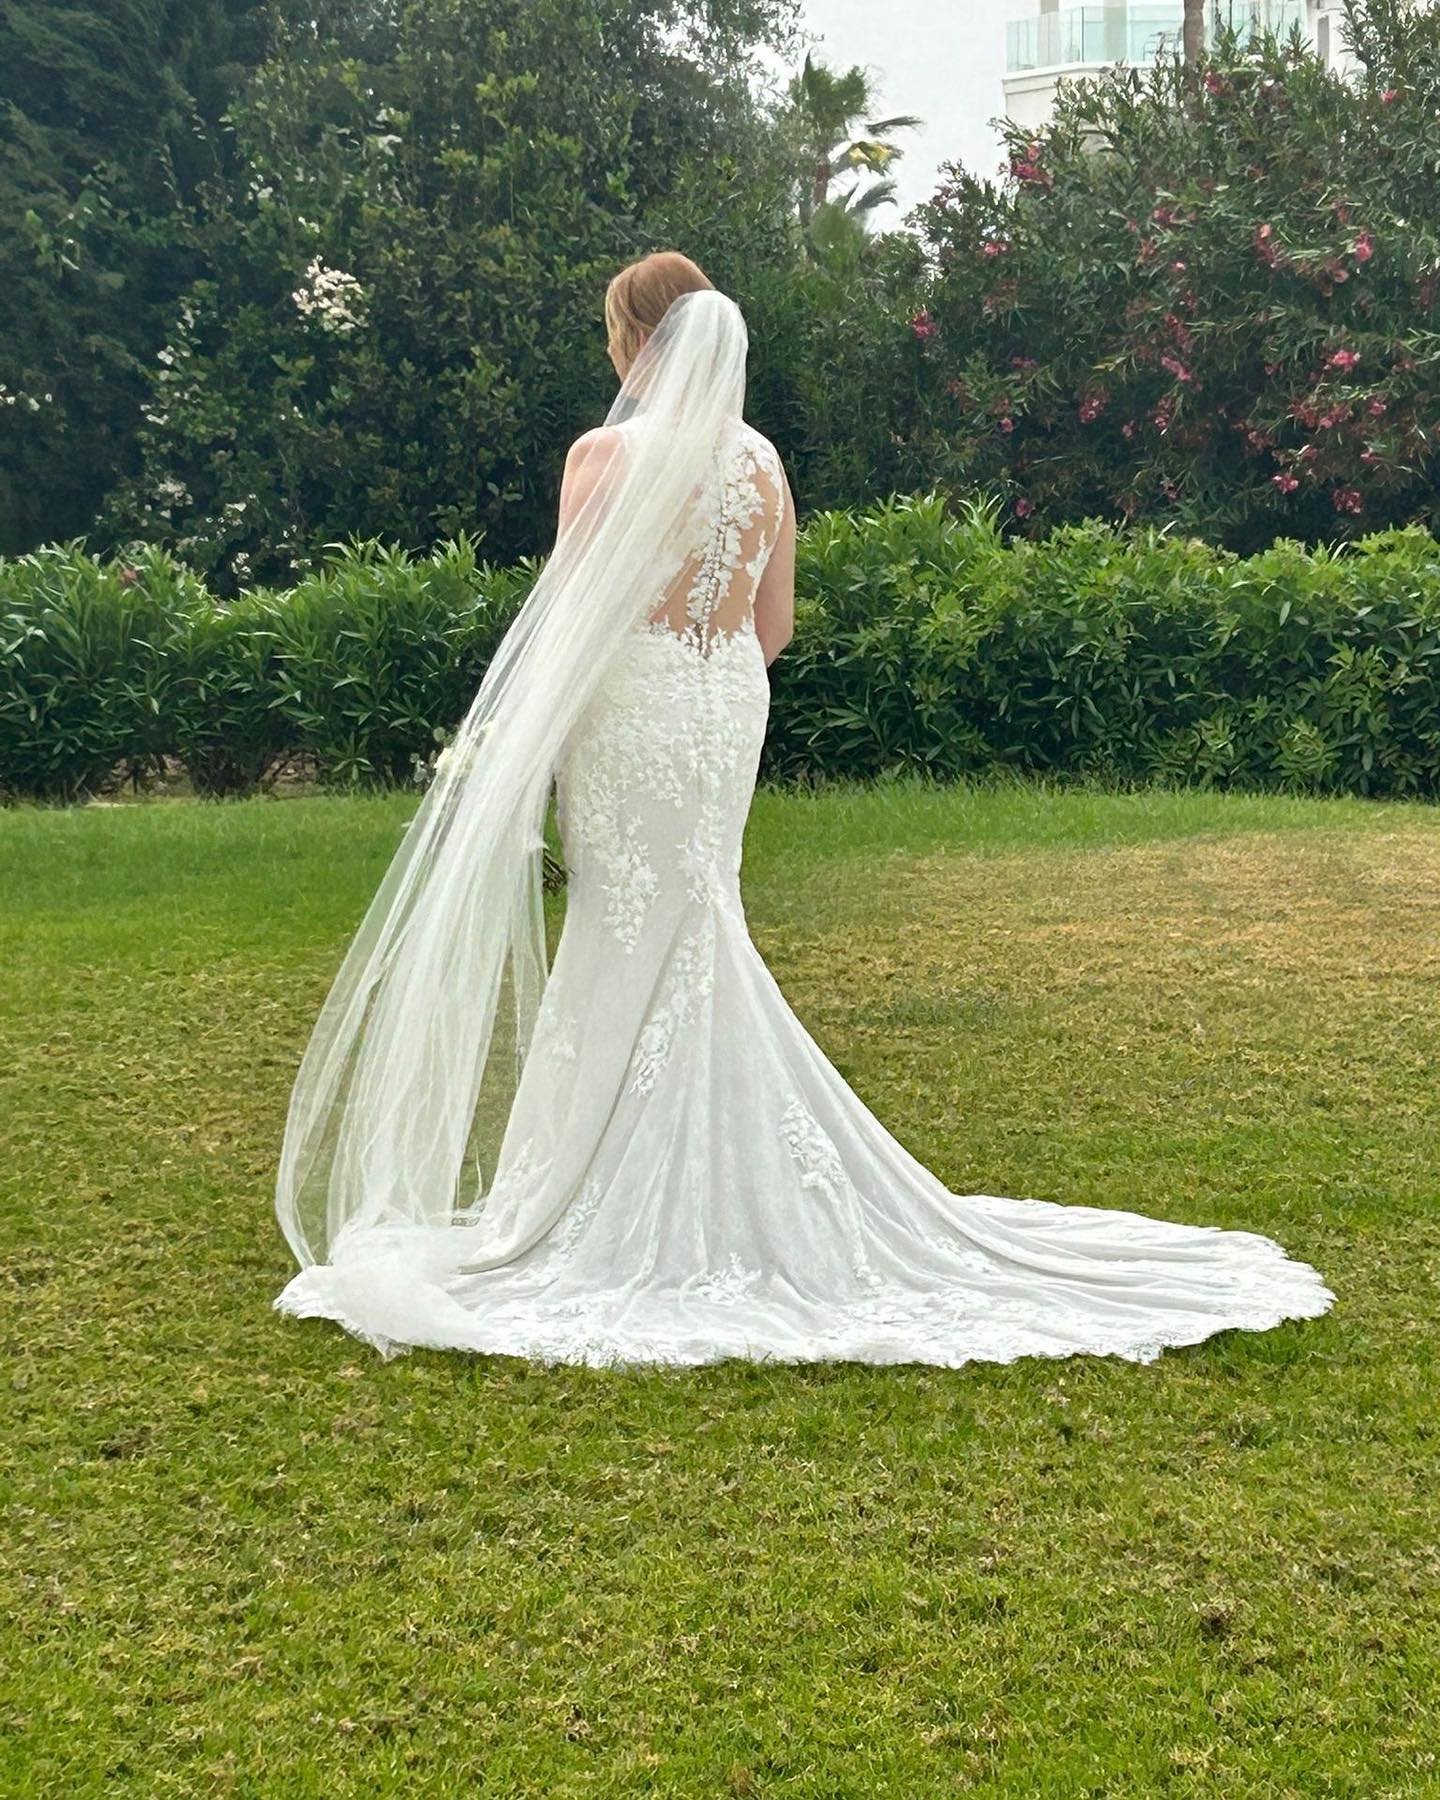 The veil 😍😍

As part of her alterations, beautiful bride Sally asked us to incorporate one of her grandma's buttons on the train lace to make her part of the day.

You look stunning Sally, massive congratulations!